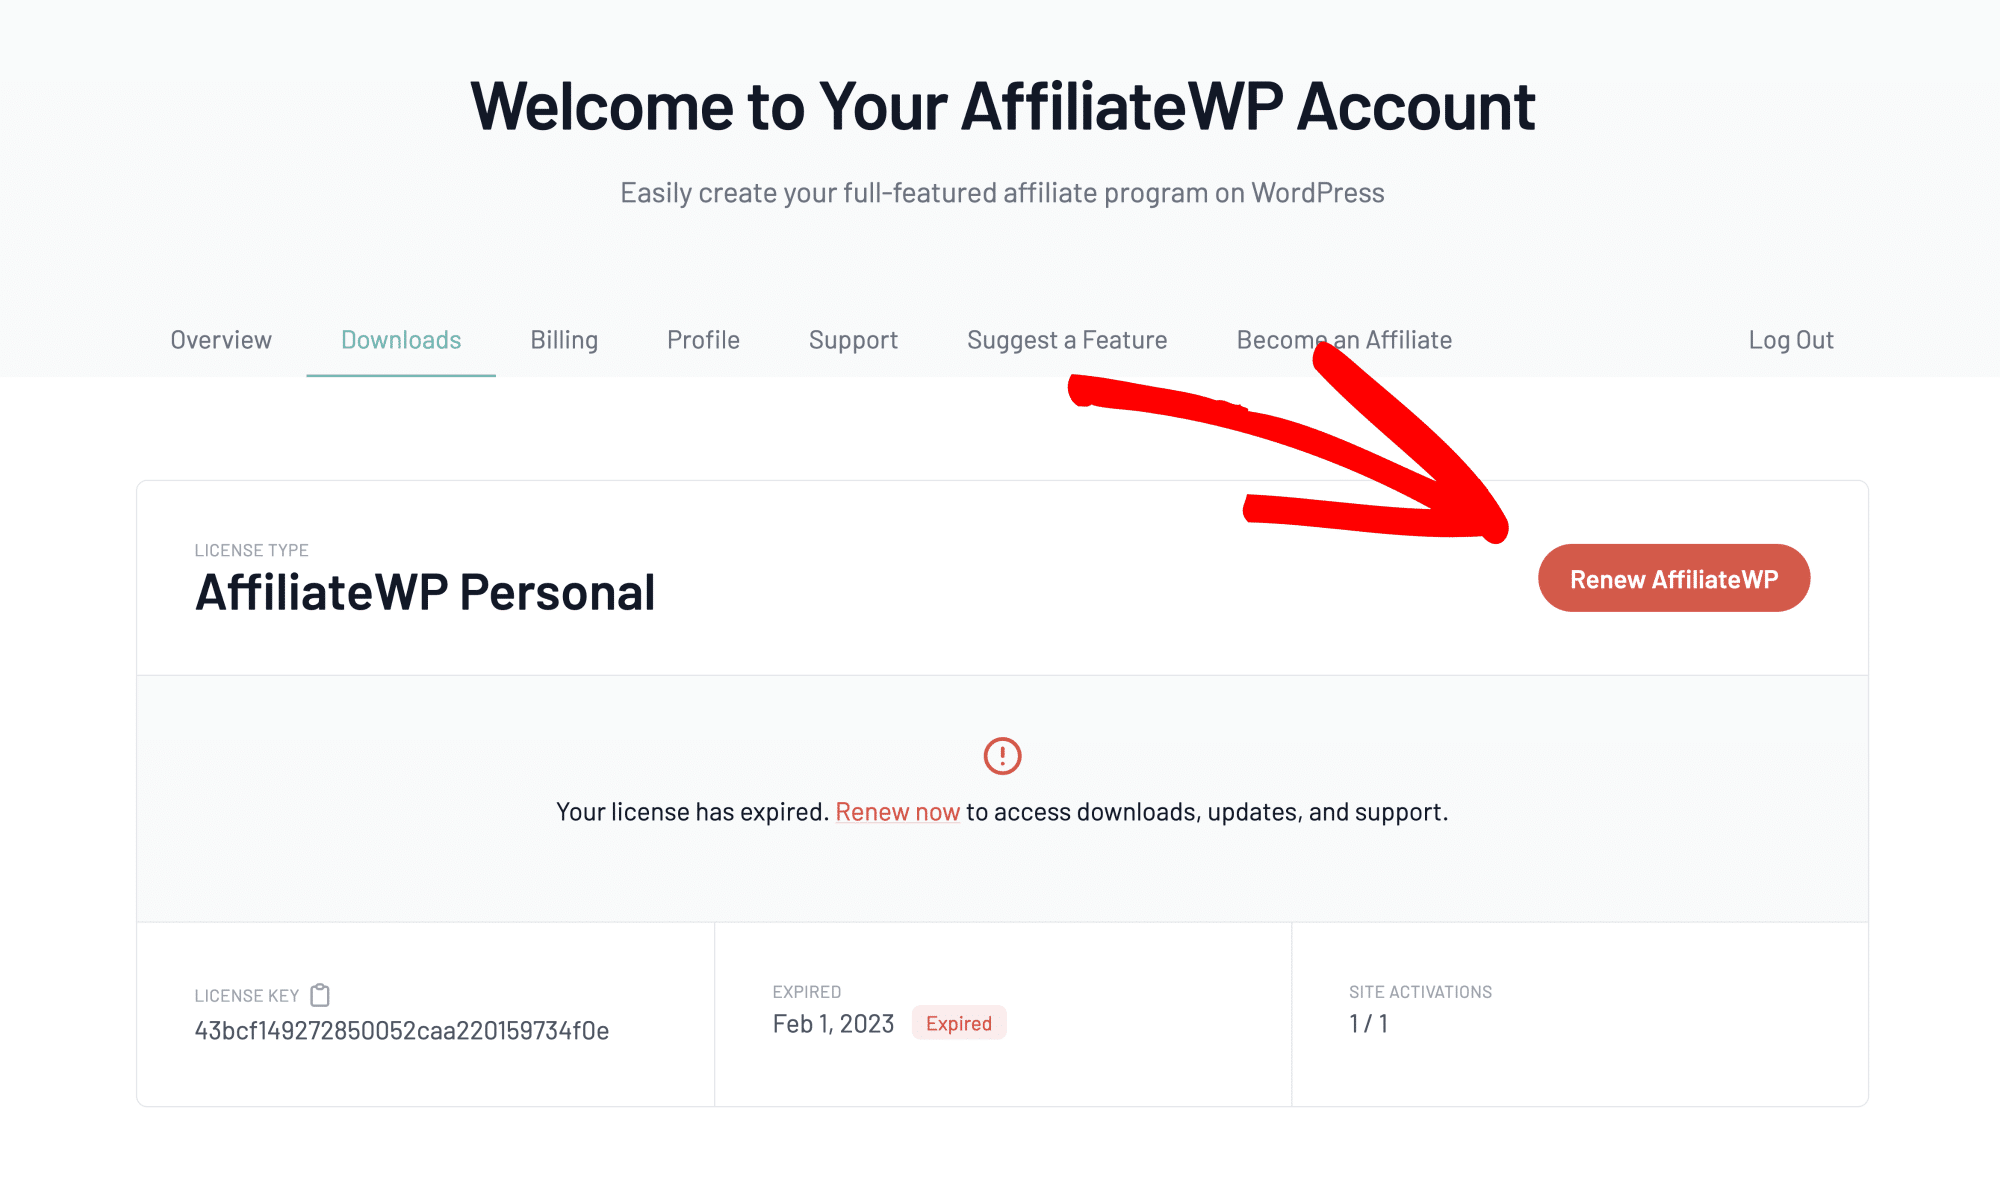 The AffiliateWP account page showing an expired license